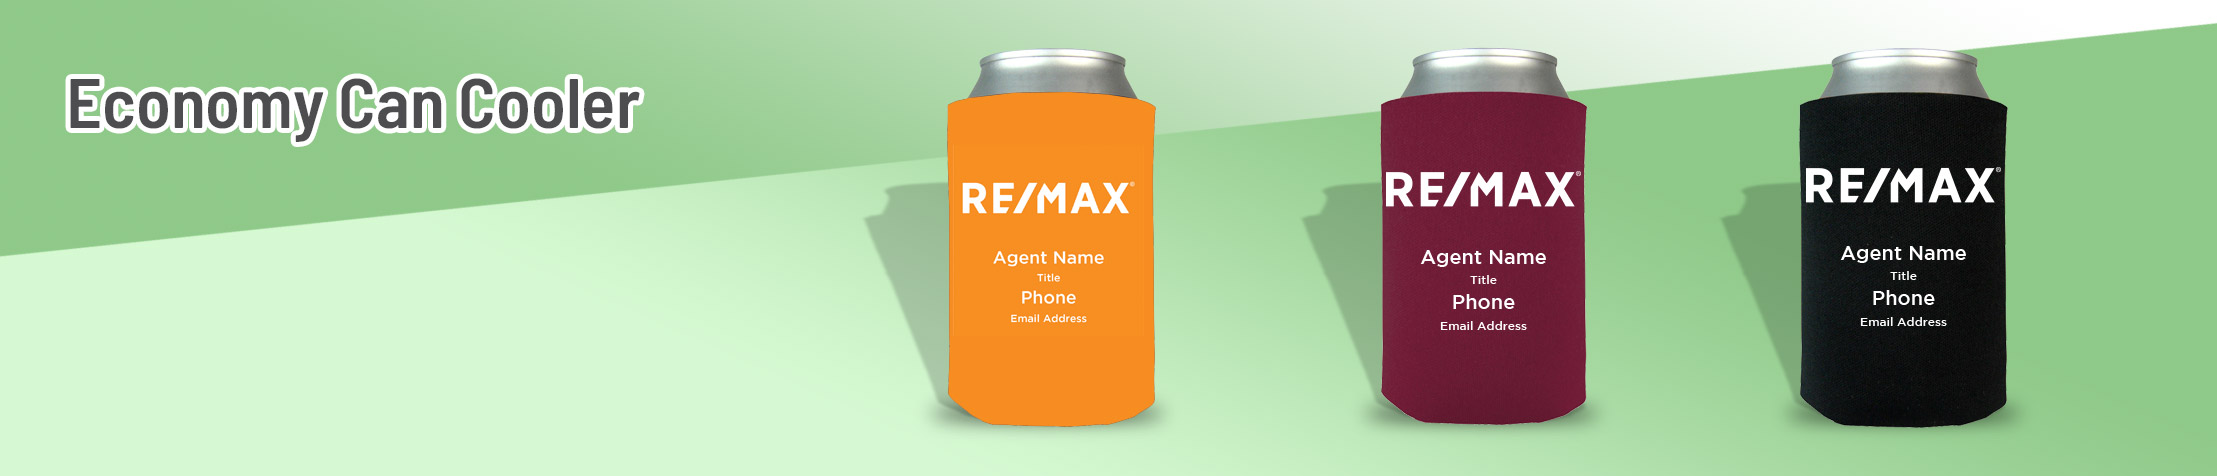 RE/MAX Real Estate Economy Can Cooler - RE/MAX  personalized realtor promotional products | Sparkprint.com